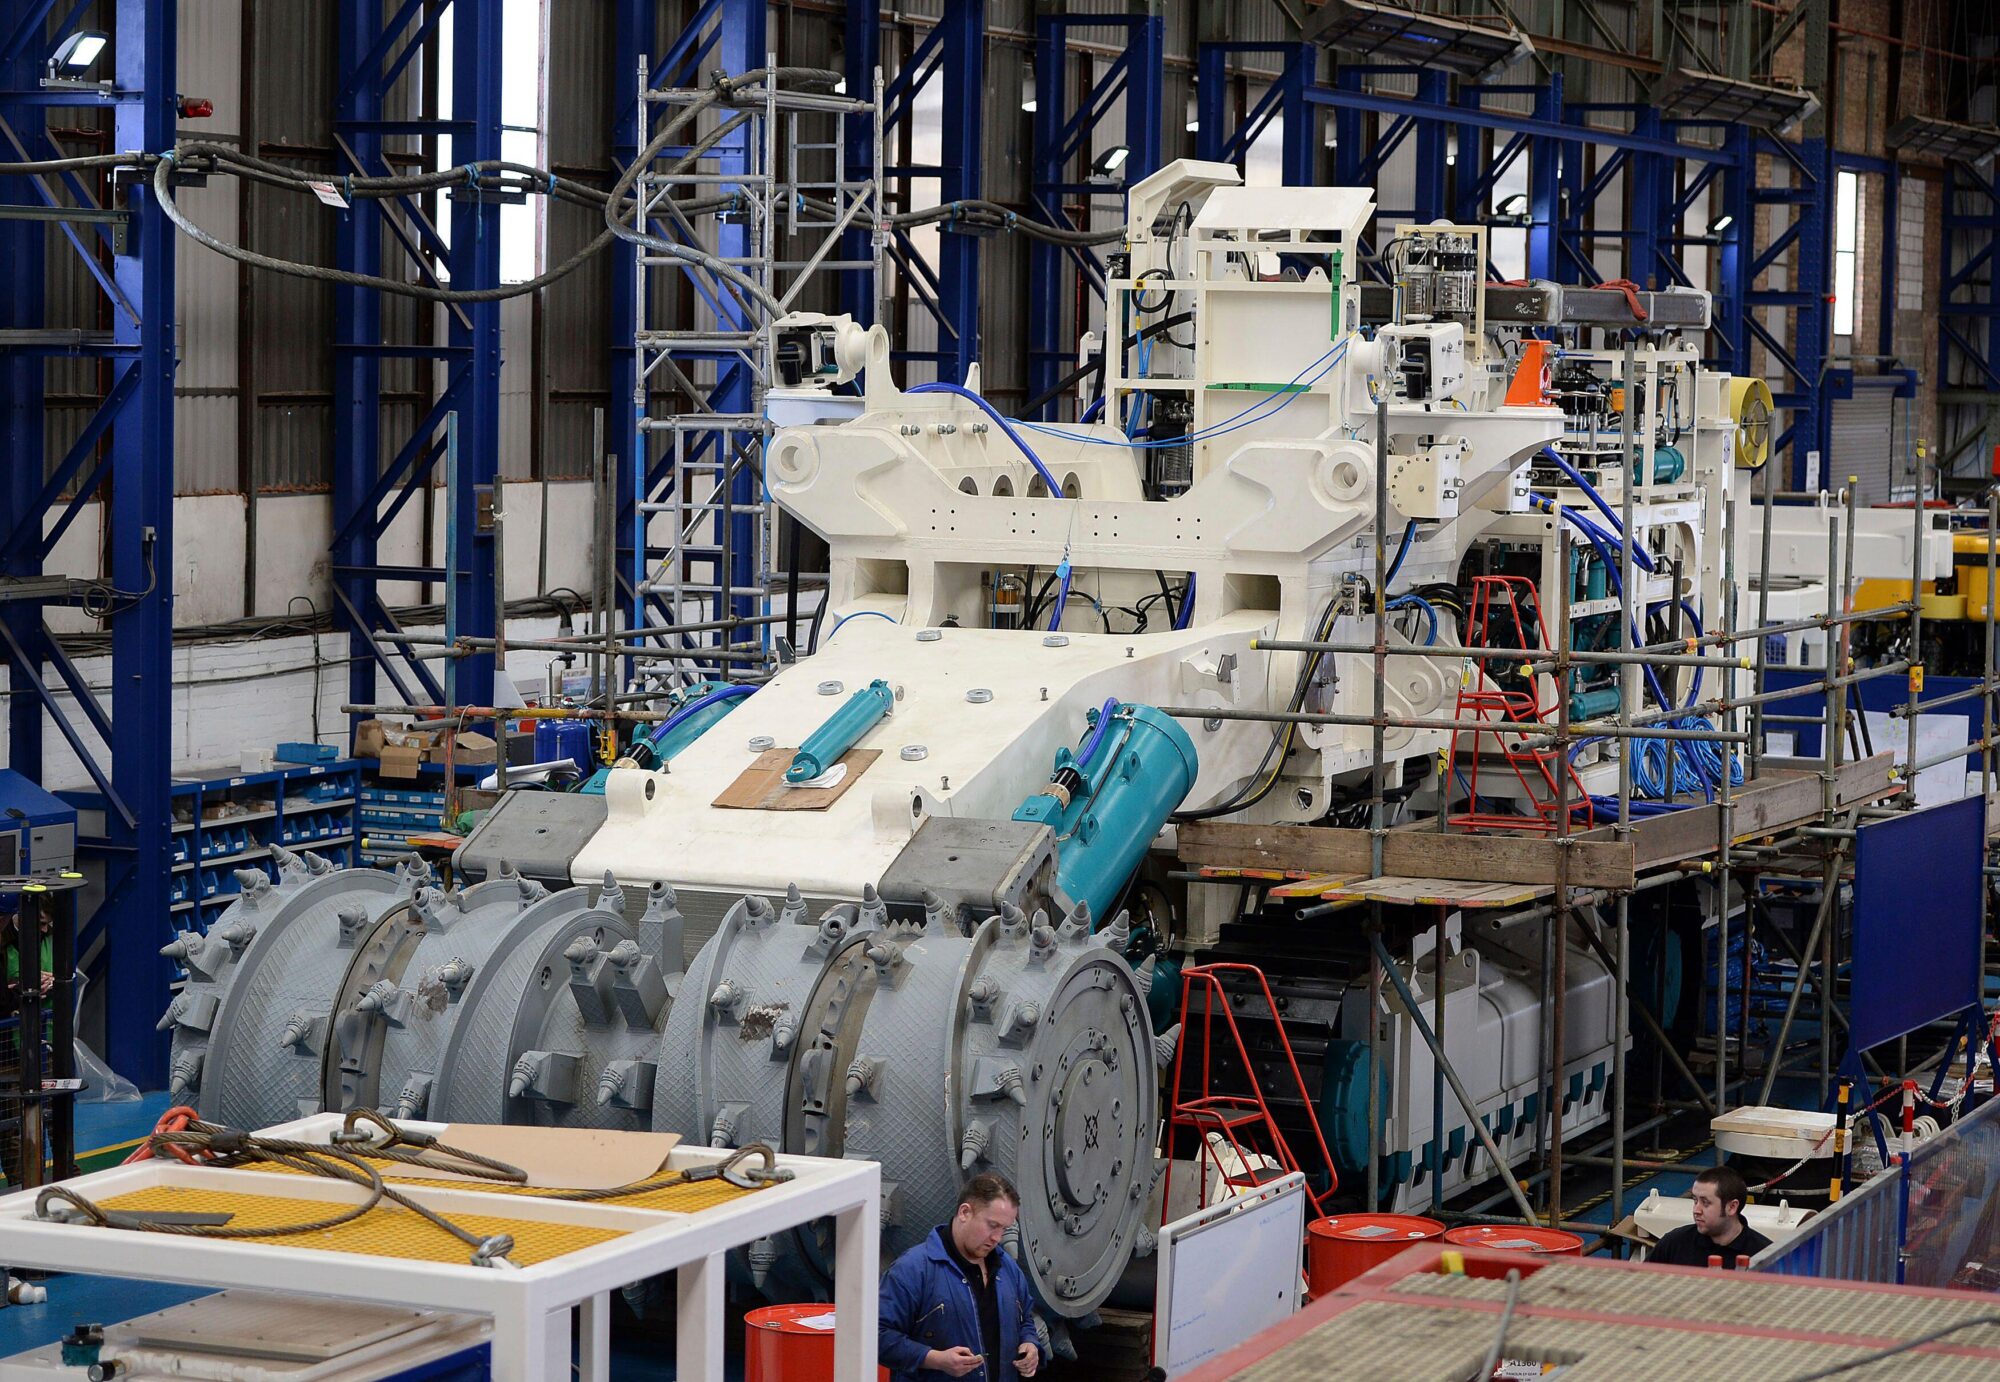 Employees of Soil Machine Dynamics (SMD) work on a subsea mining machine being built